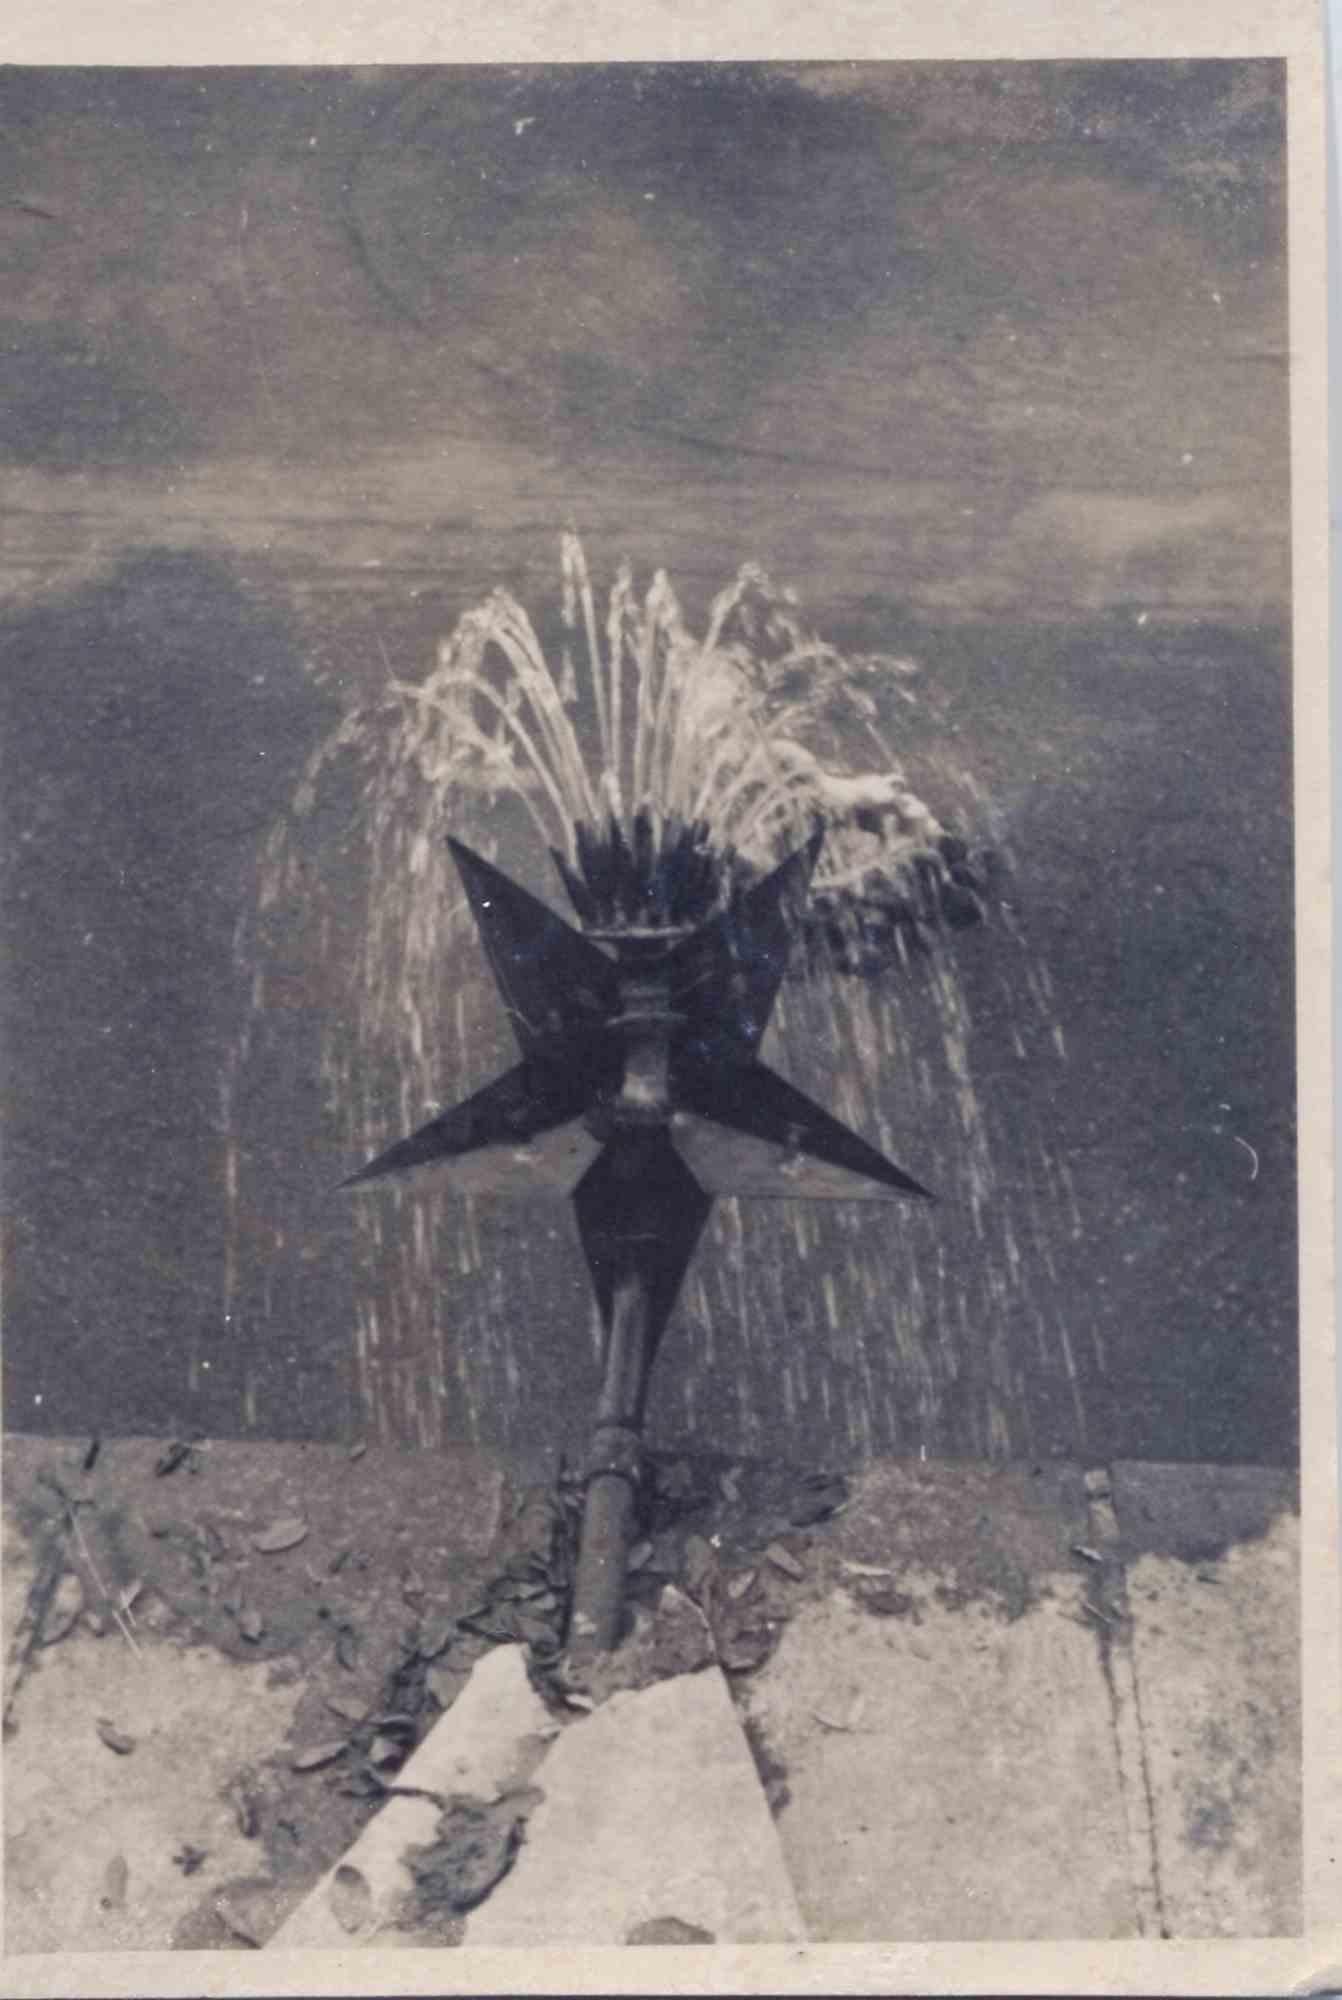 Unknown Figurative Photograph - Old days Photo - Fountain - Vintage Photo - Mid-20th Century